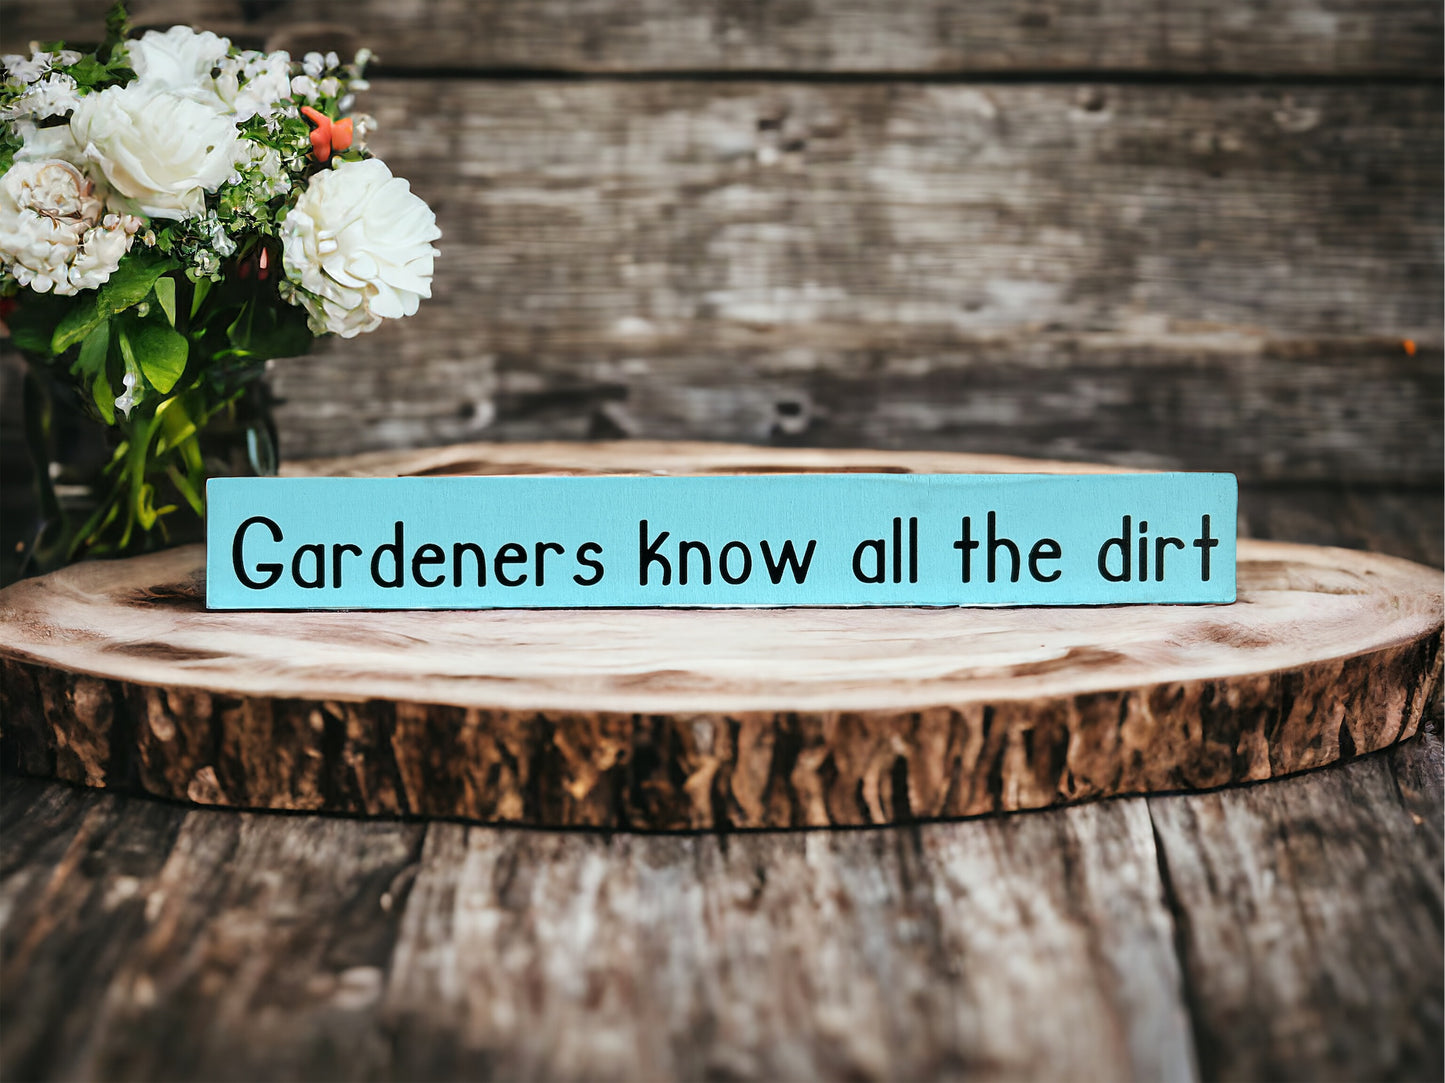 Gardeners Know All the Dirt - Wood Spring Shelf Sitter